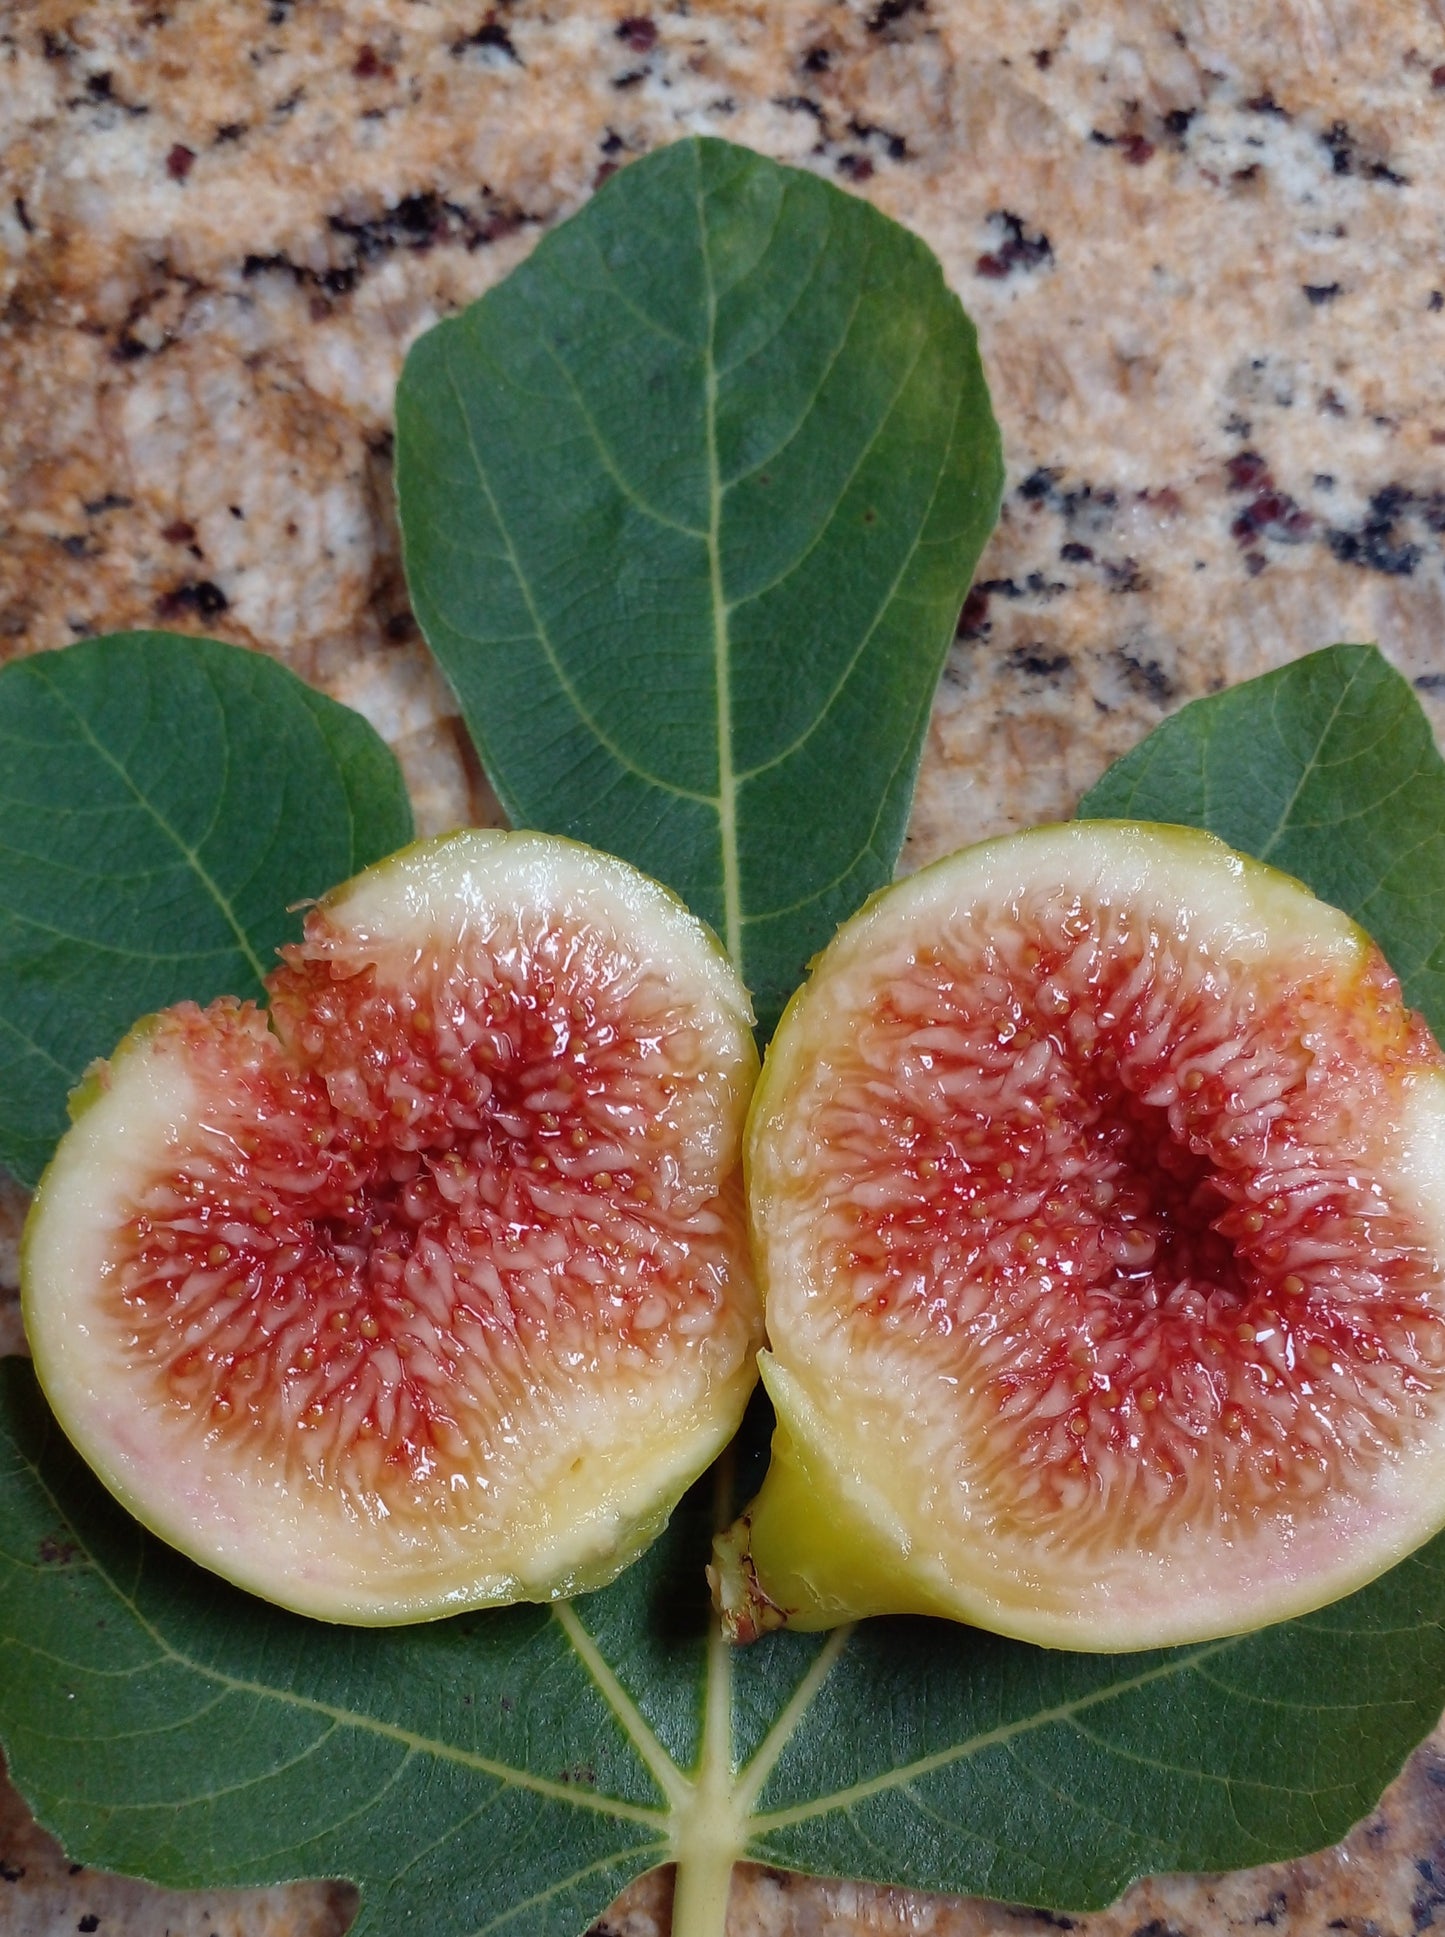 Armenian Fig - 2 Cuttings - Large Yellow Figs with Refreshing Melon Flavor